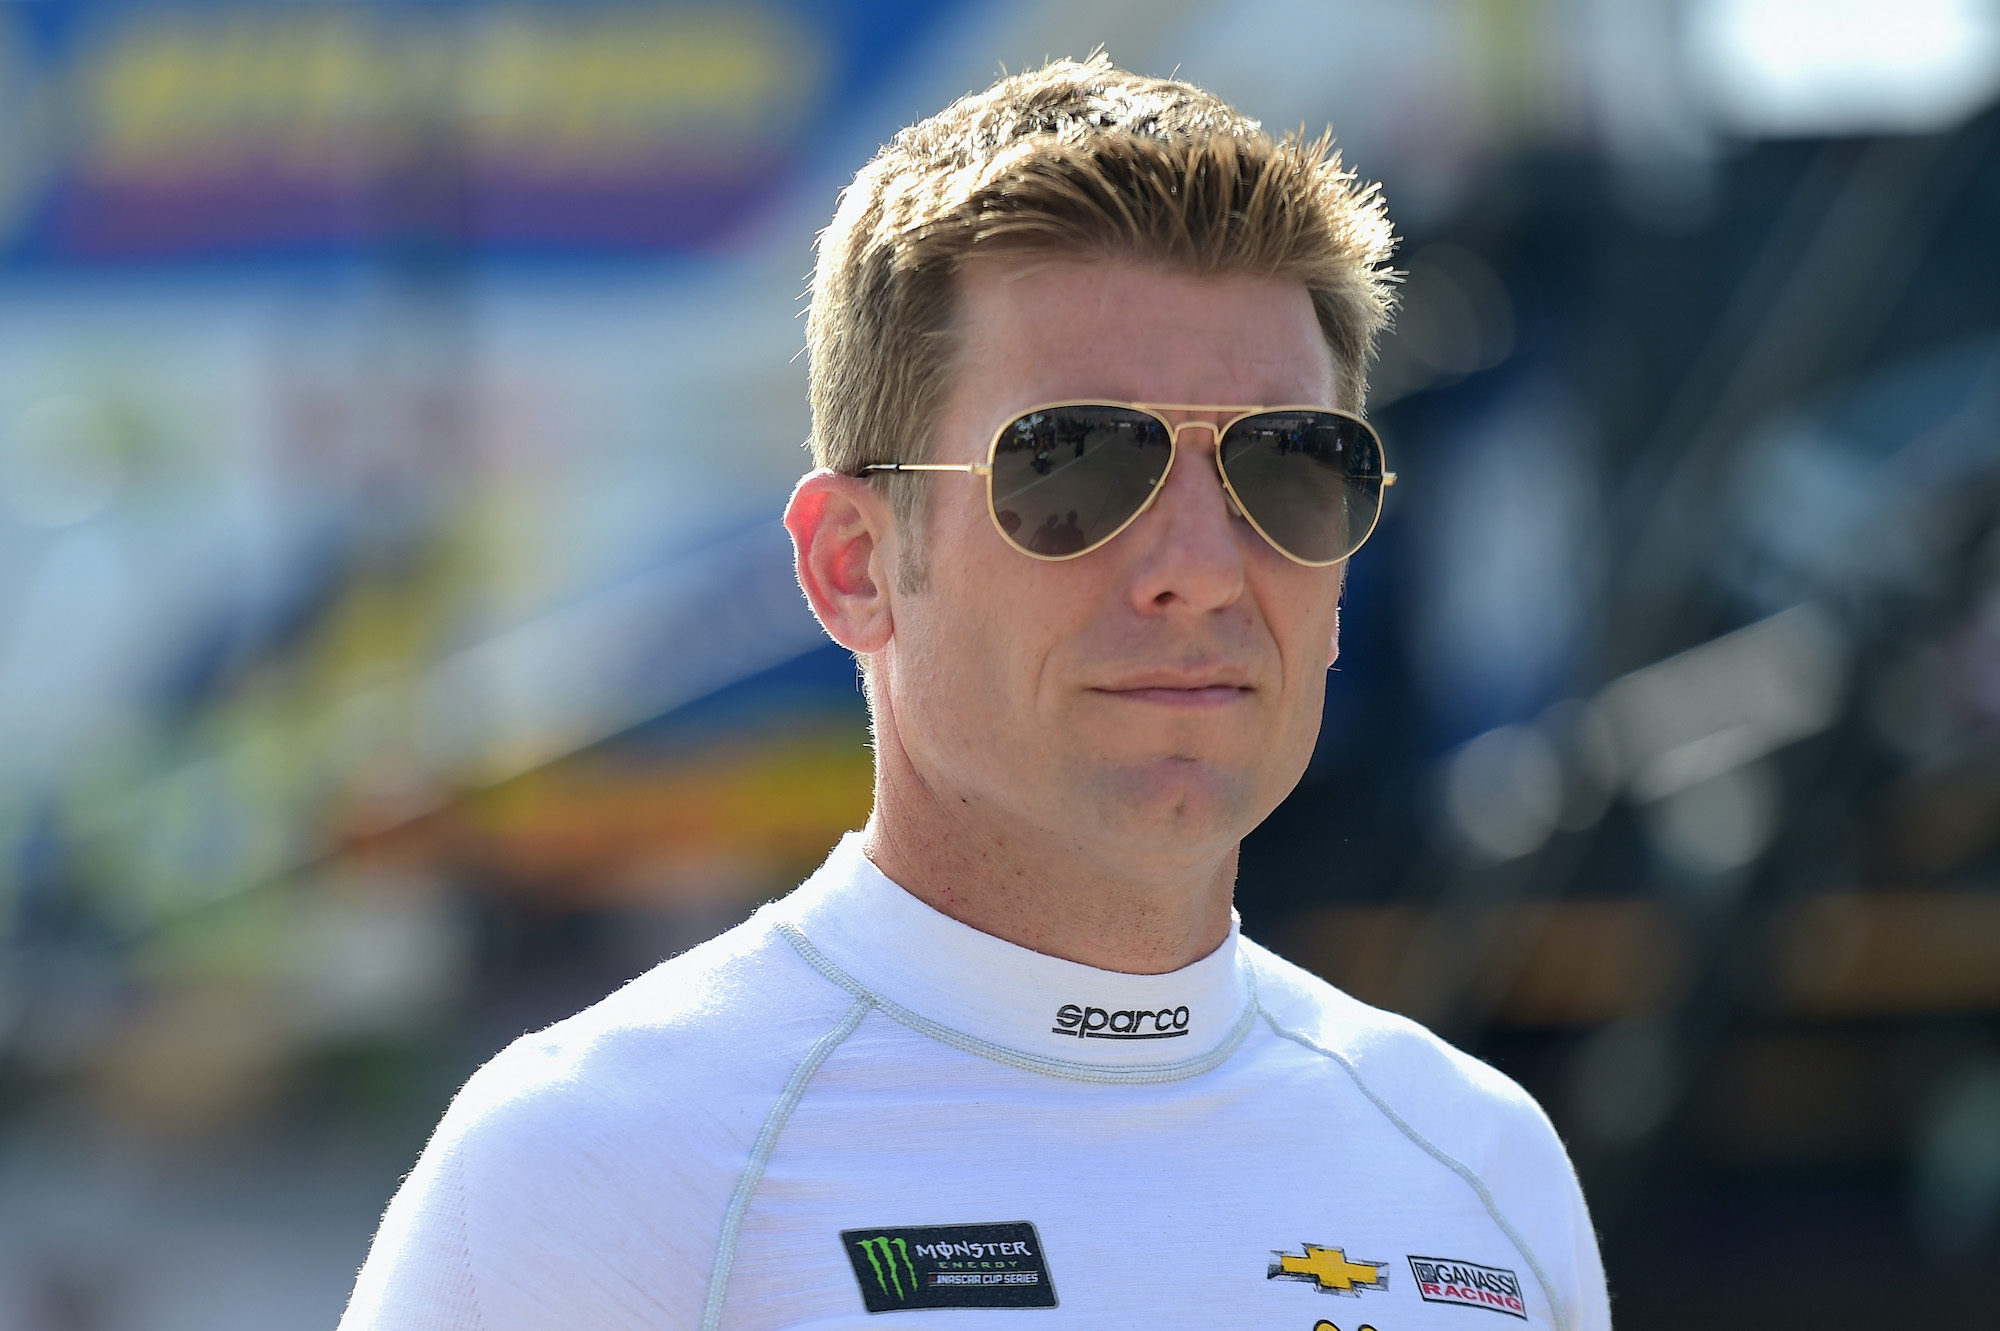 Jamie McMurray Brilliantly Shut Up Clint Bowyer and Received High Praise for Overall Performance From Notable NASCAR Names, Including 1 Top Driver